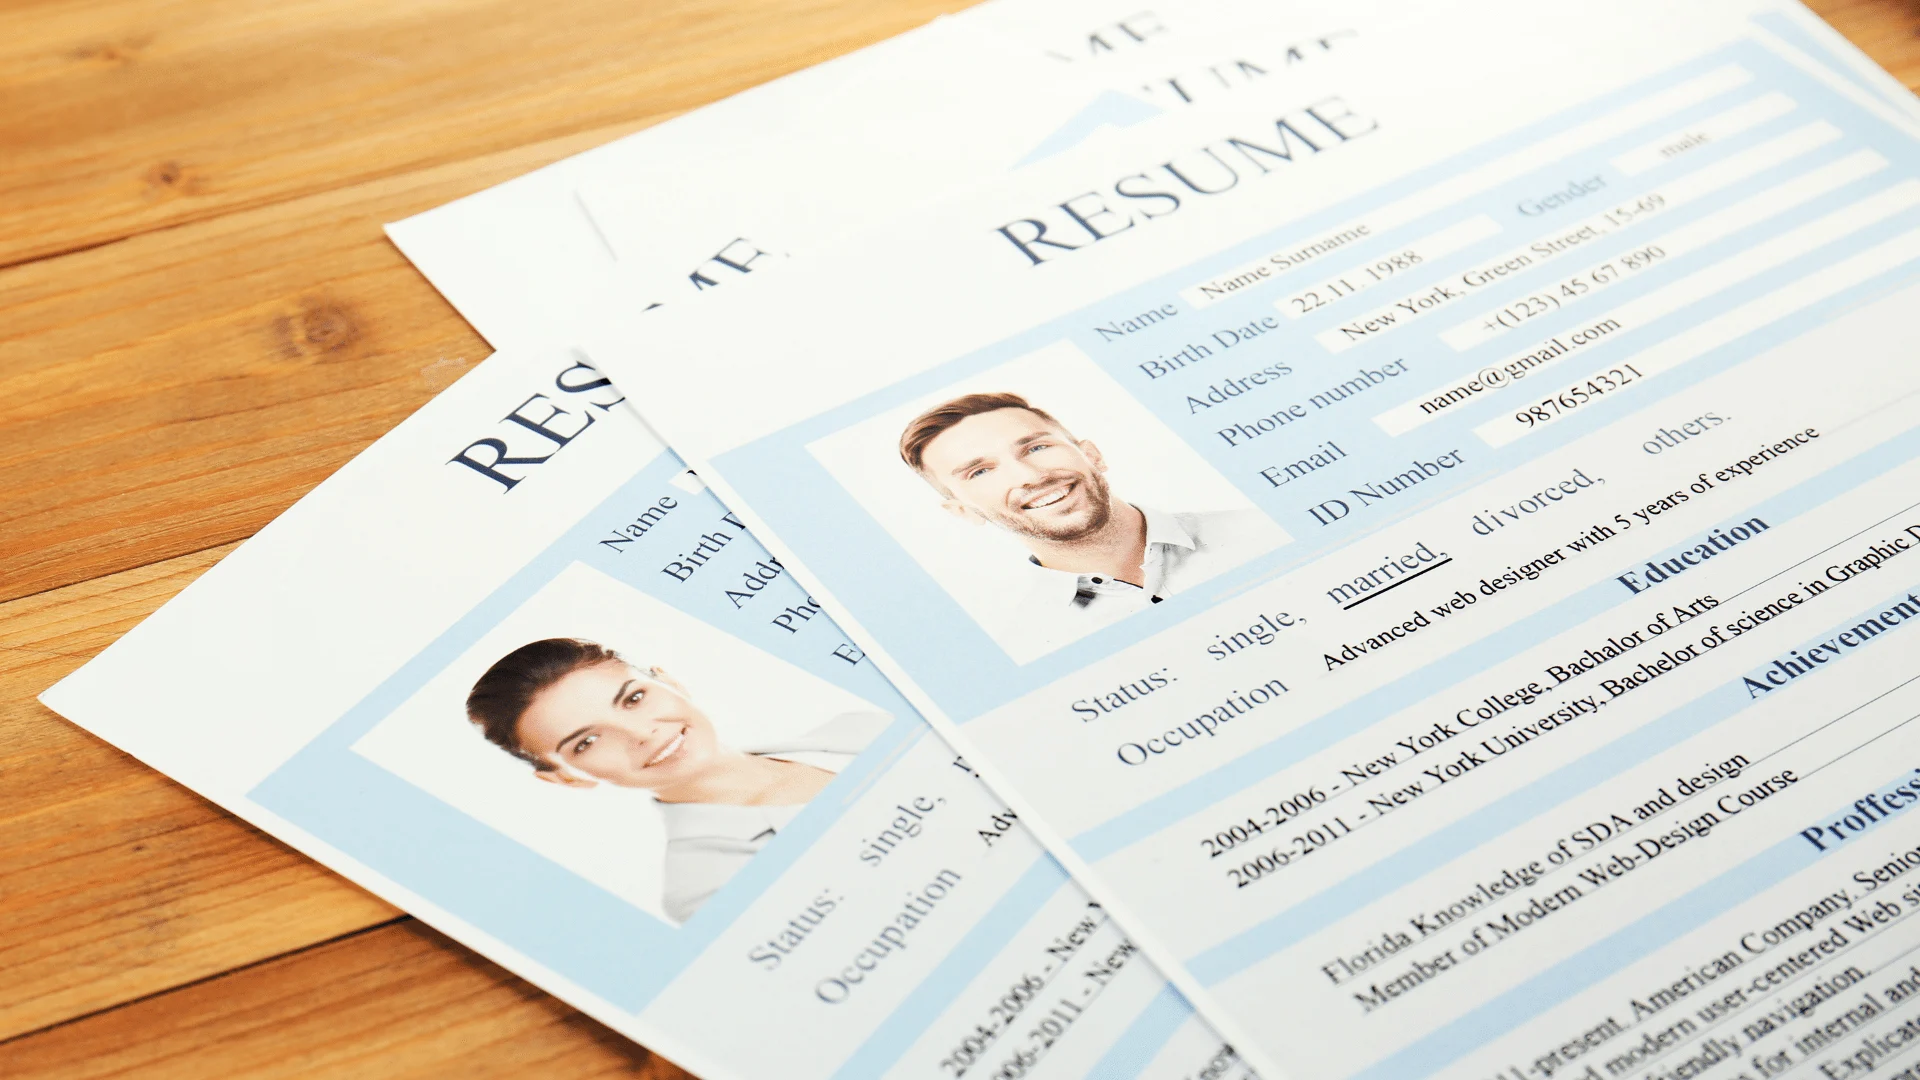 Should You Put a Photo on Your Resume in 2022?